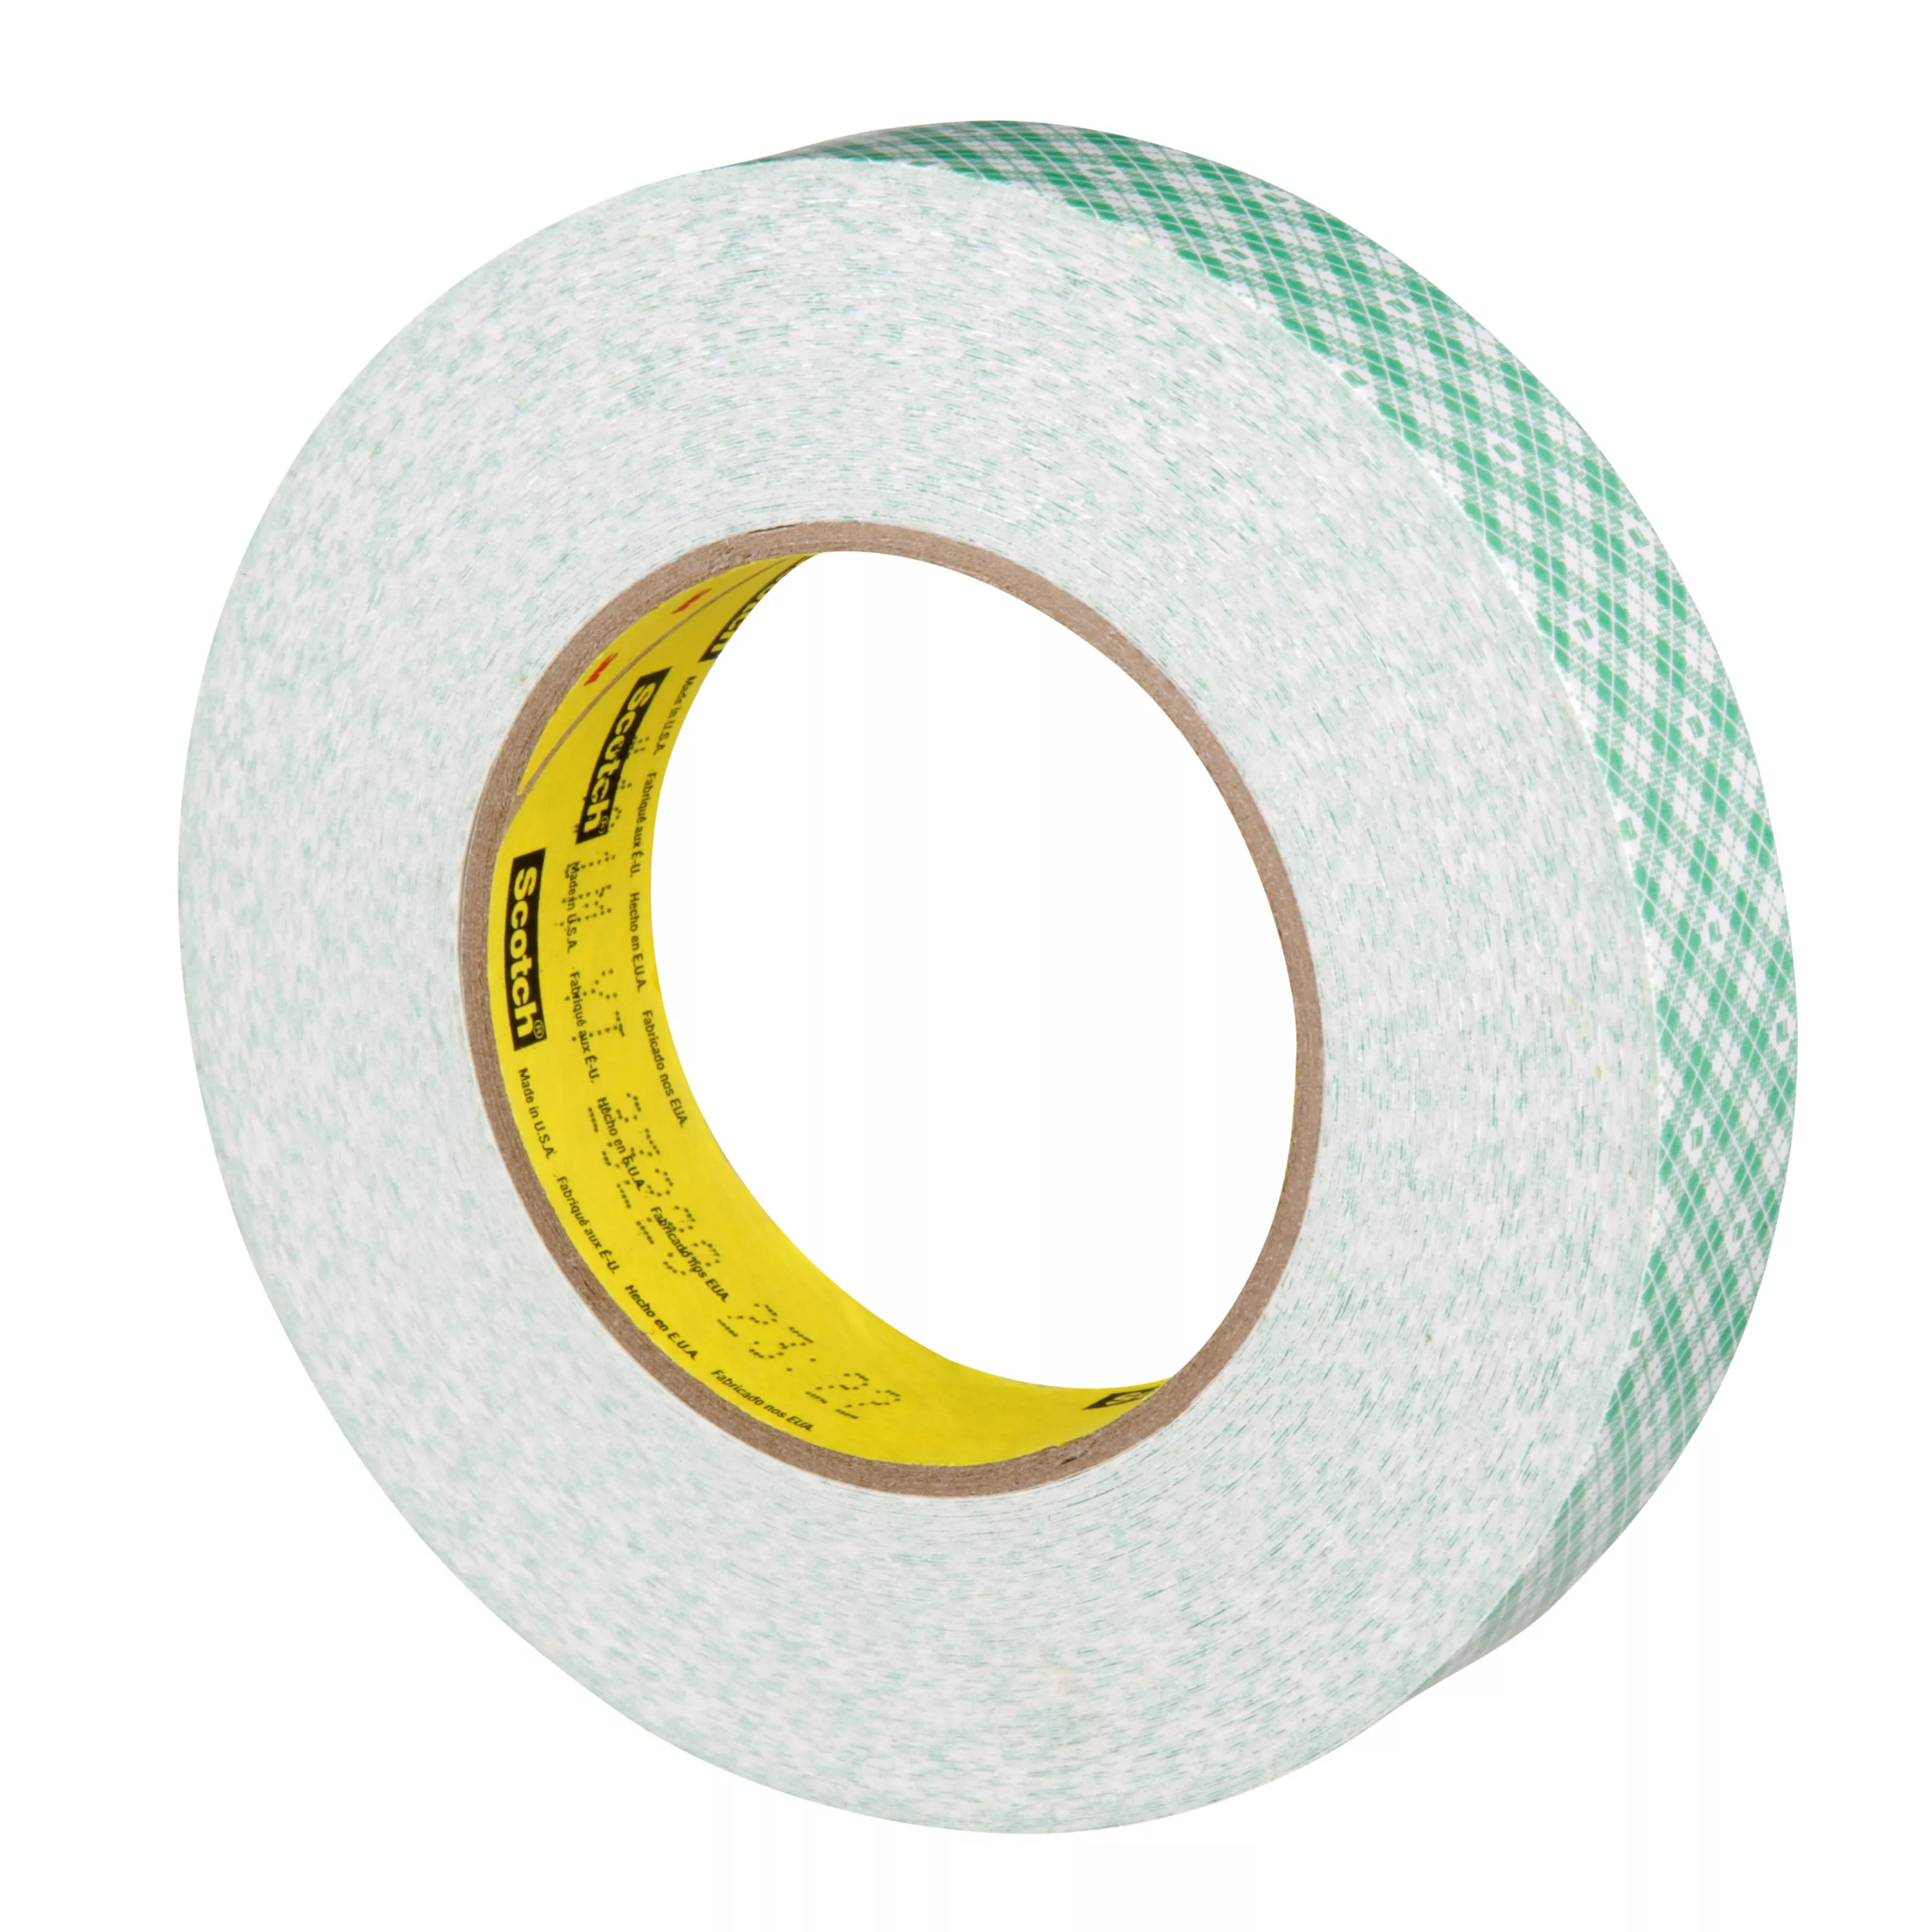 Product Number 401M | 3M™ Double Coated Paper Tape 401M